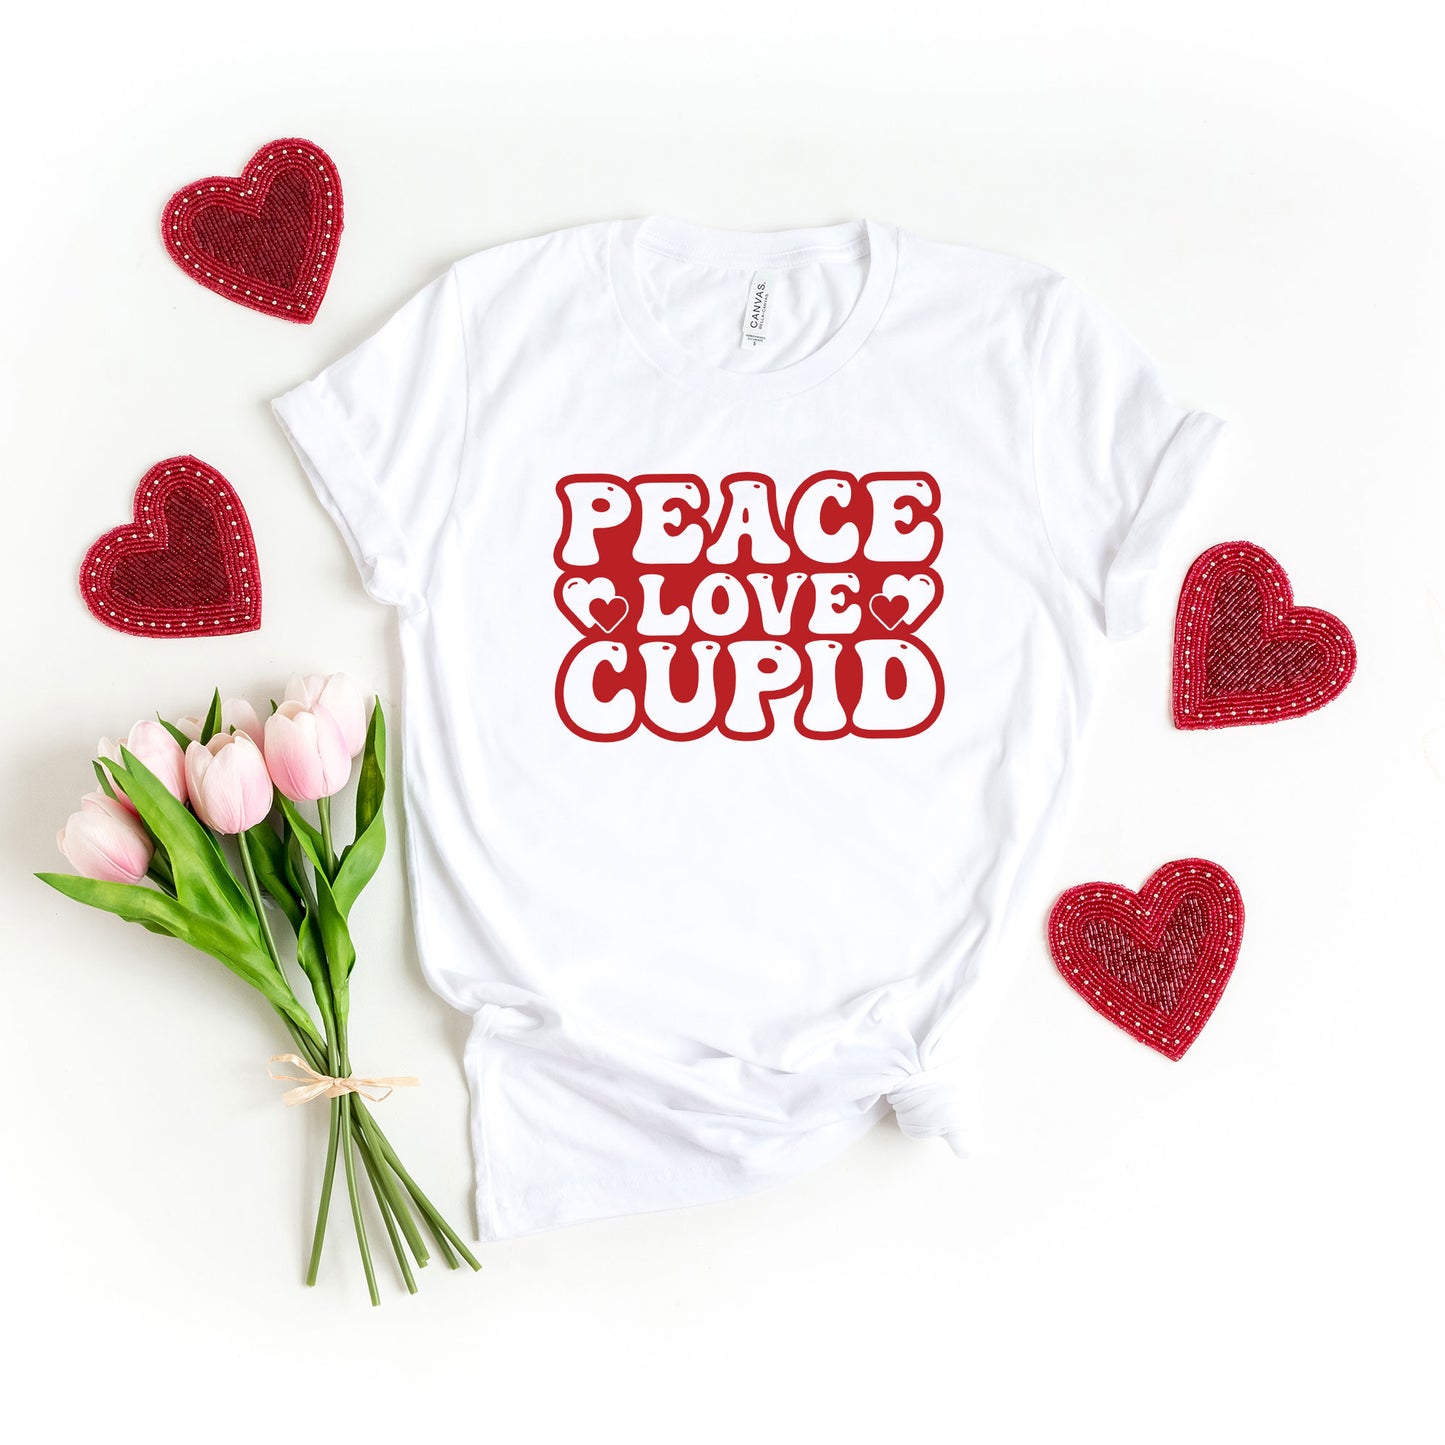 Peace Love Cupid Balloon Letters | Short Sleeve Graphic Tee